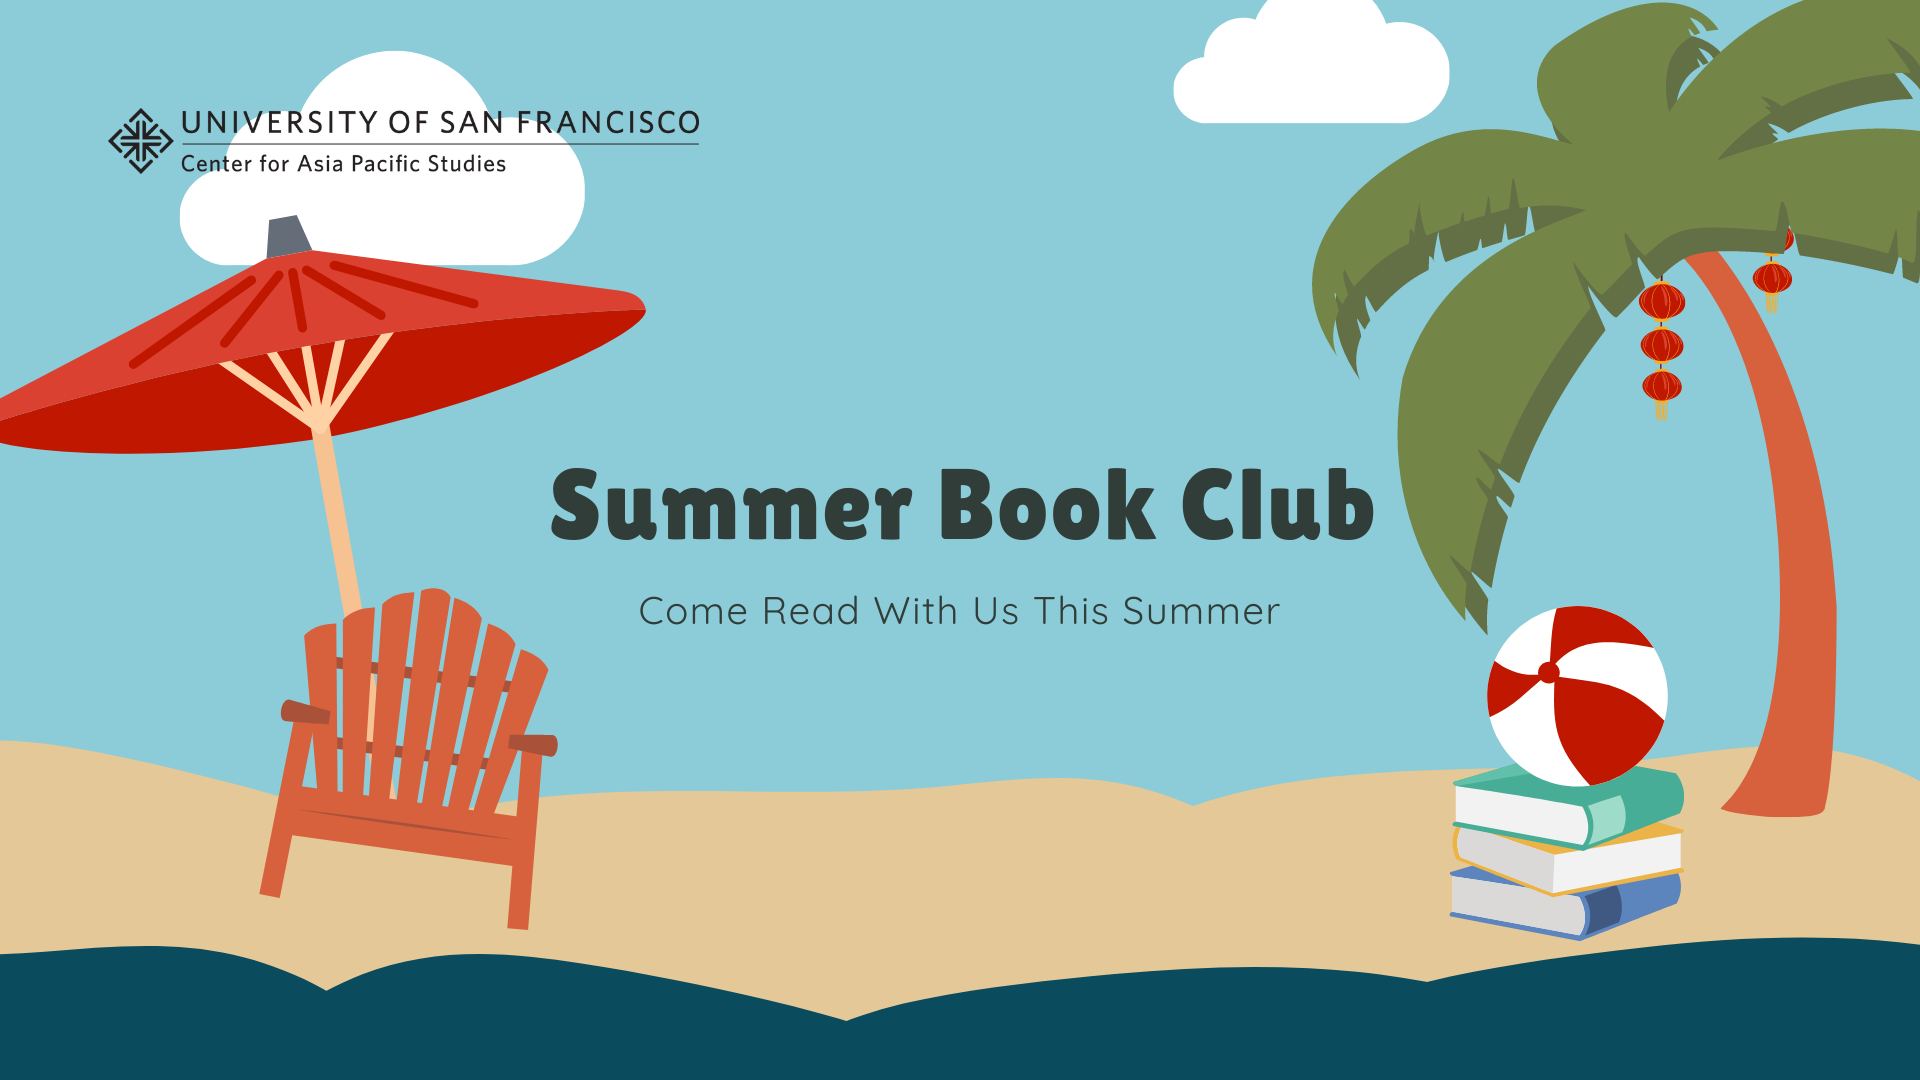 University of San Francisco, Center for Asia Pacific Studies, Summer Book Club Come read with us this summer